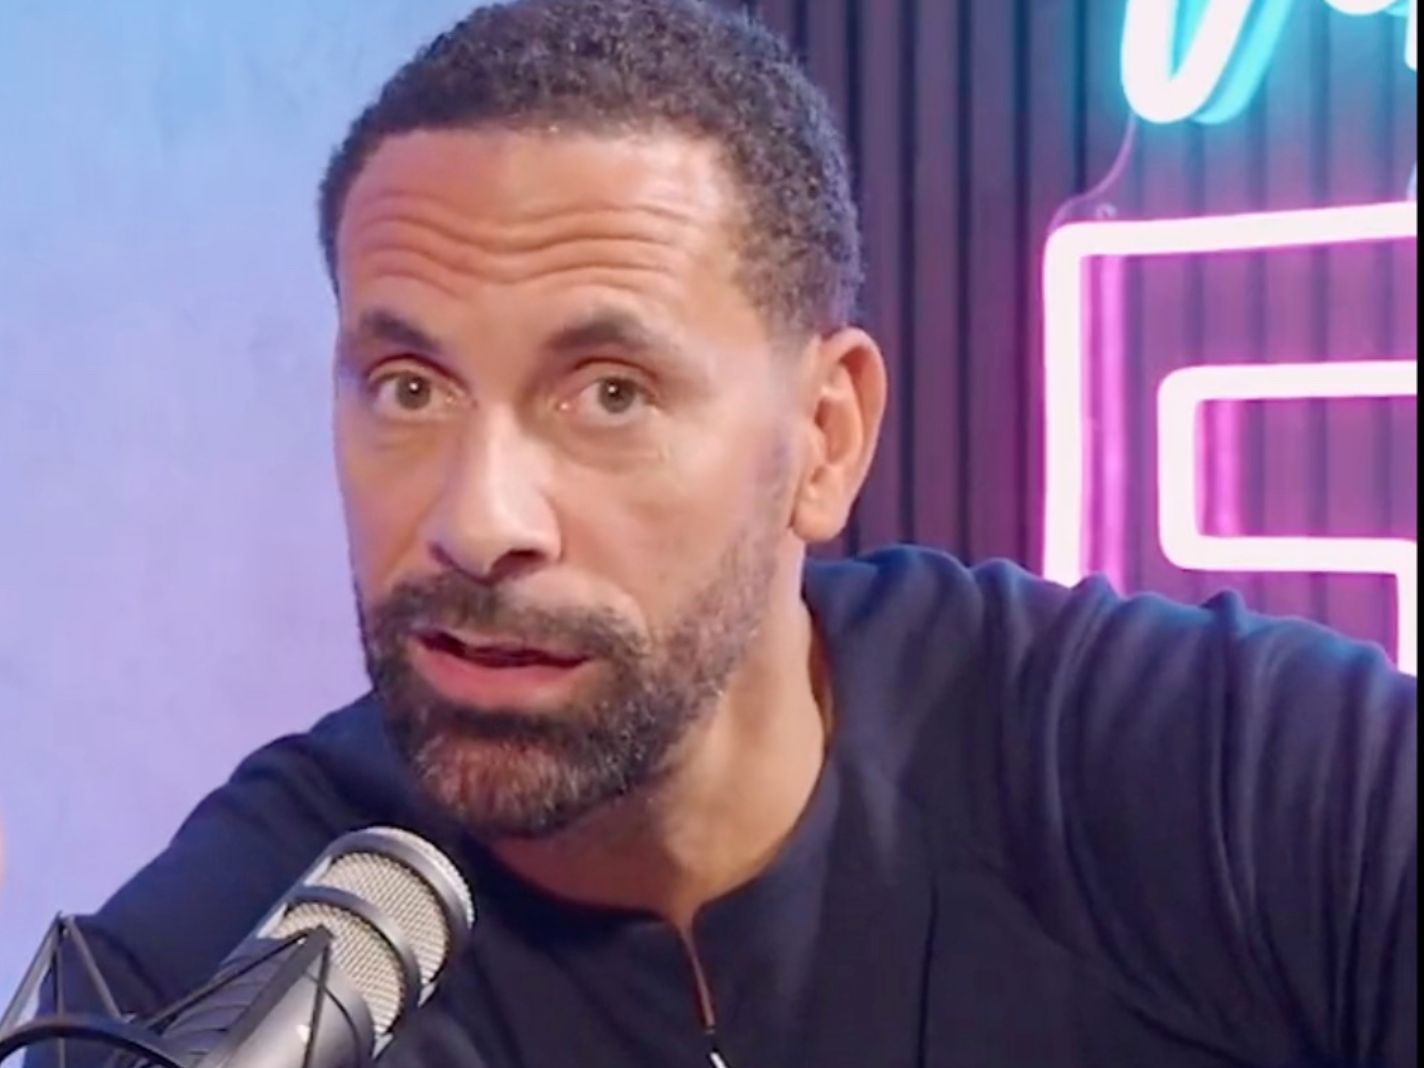 Why Rio Ferdinand Wants the Iconic “Agueroooo” Moment Scrapped Off the Internet